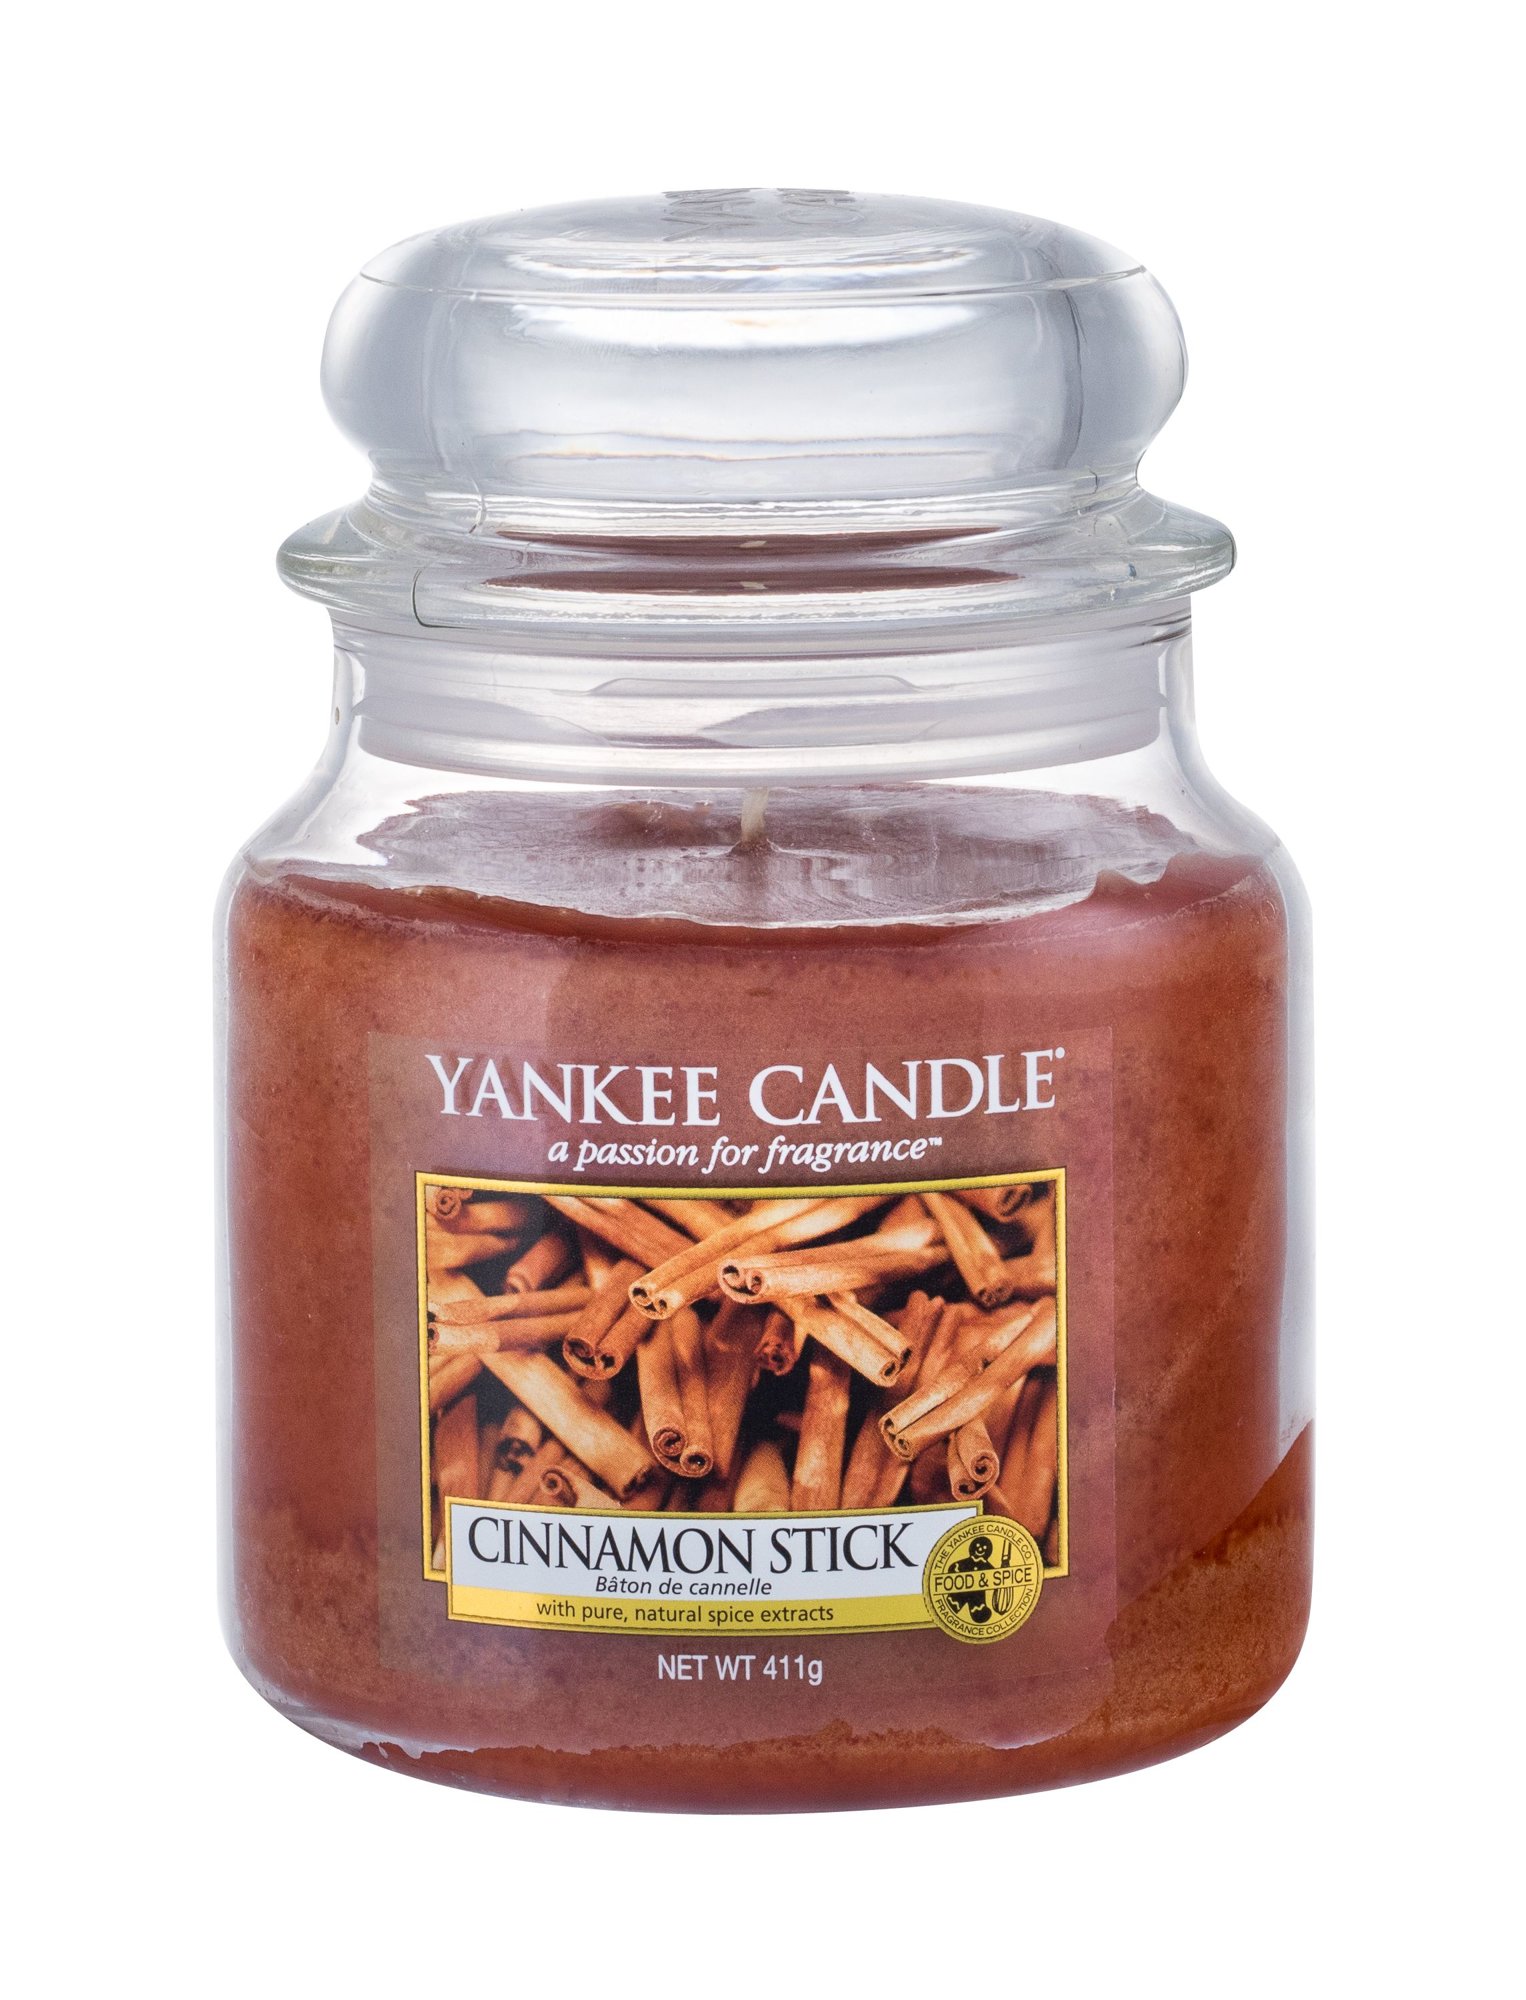 Yankee Candle Cinnamon Stick 411g Kvepalai Unisex Scented Candle